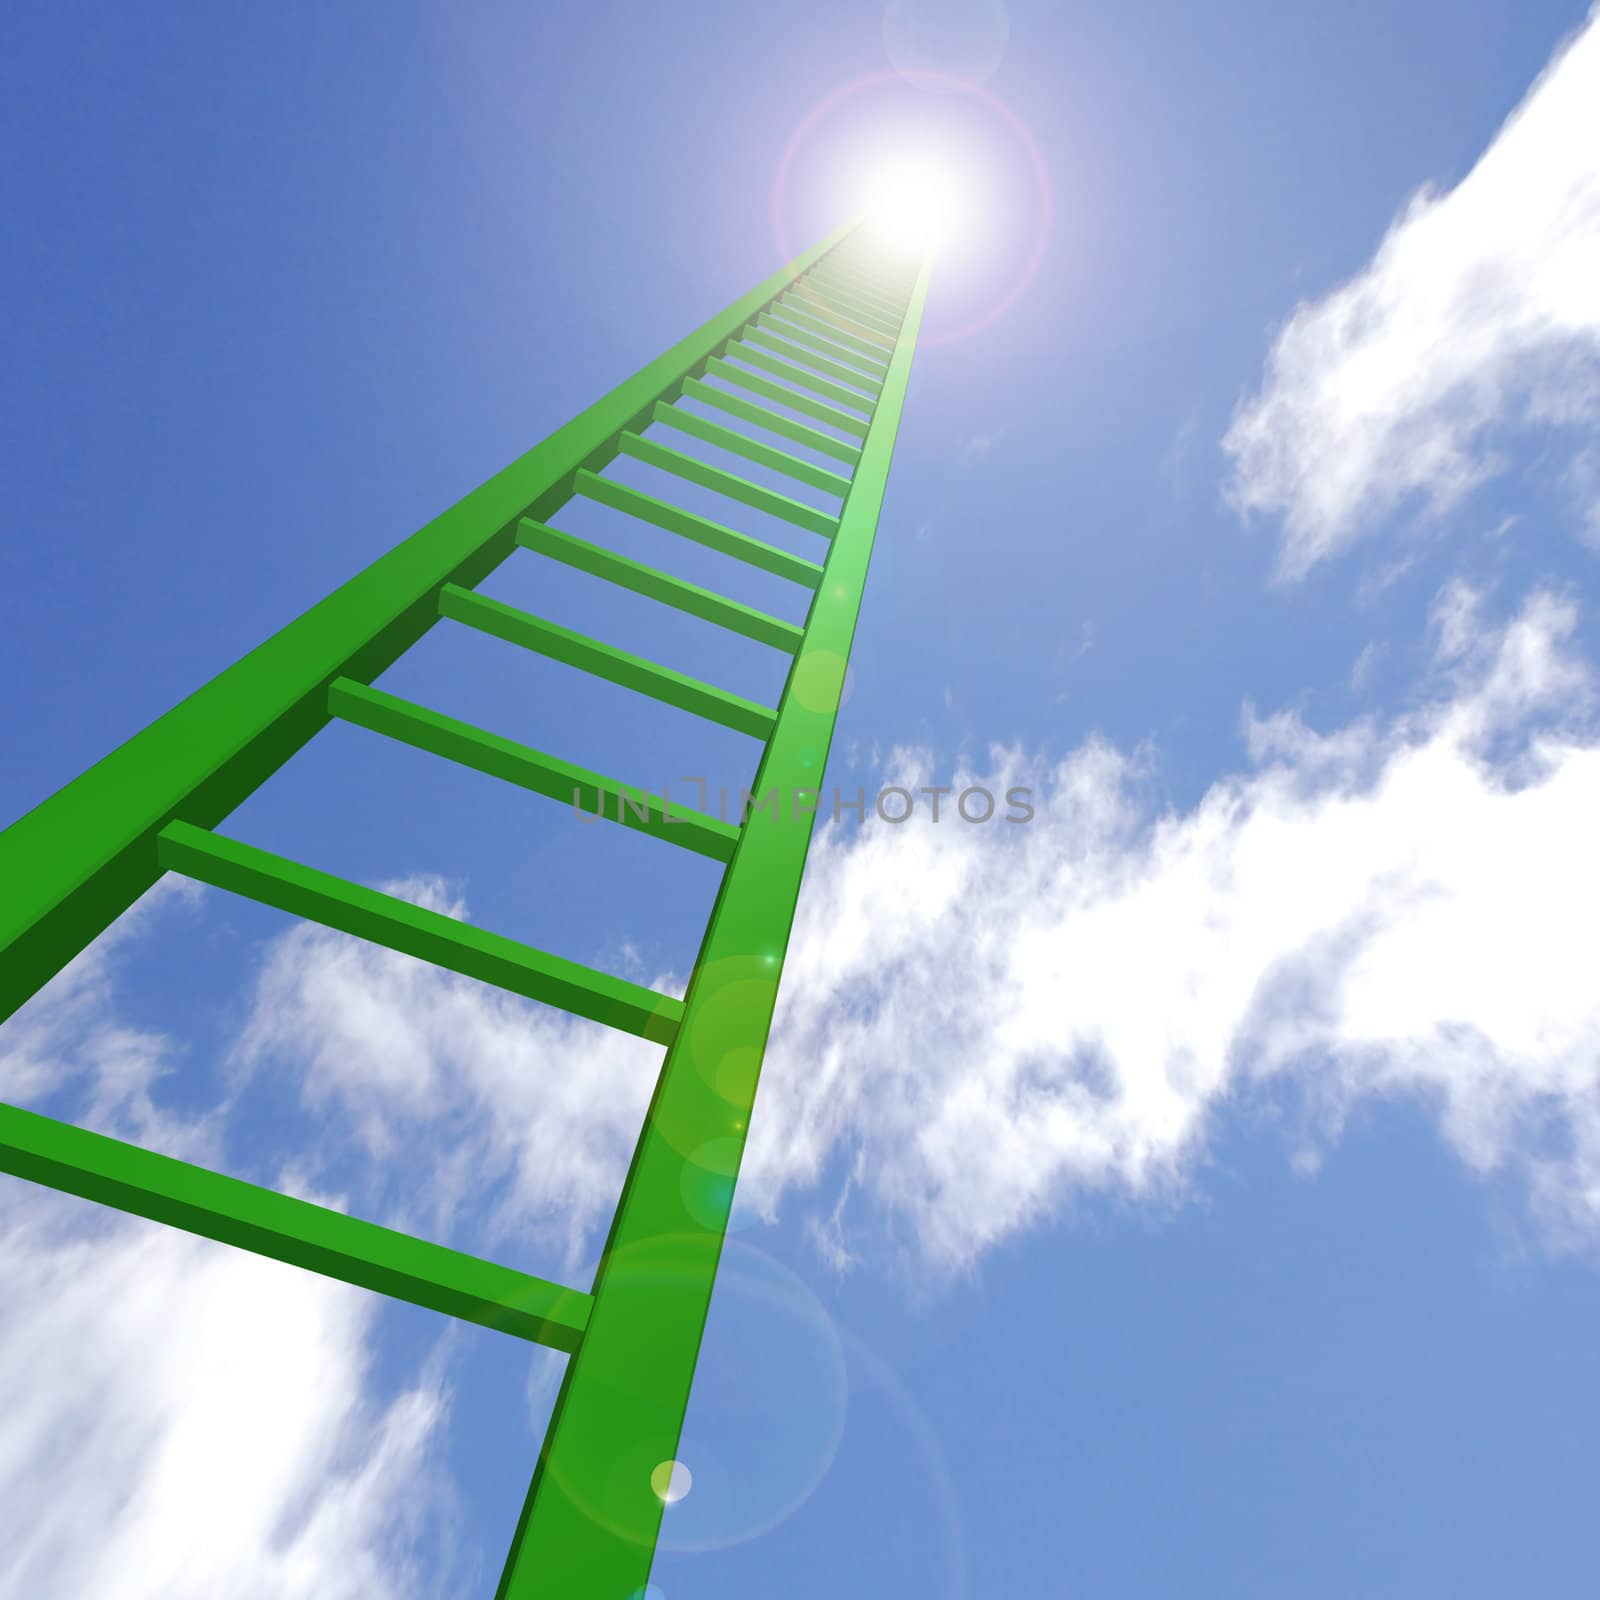 Sky Ladder by nmarques74